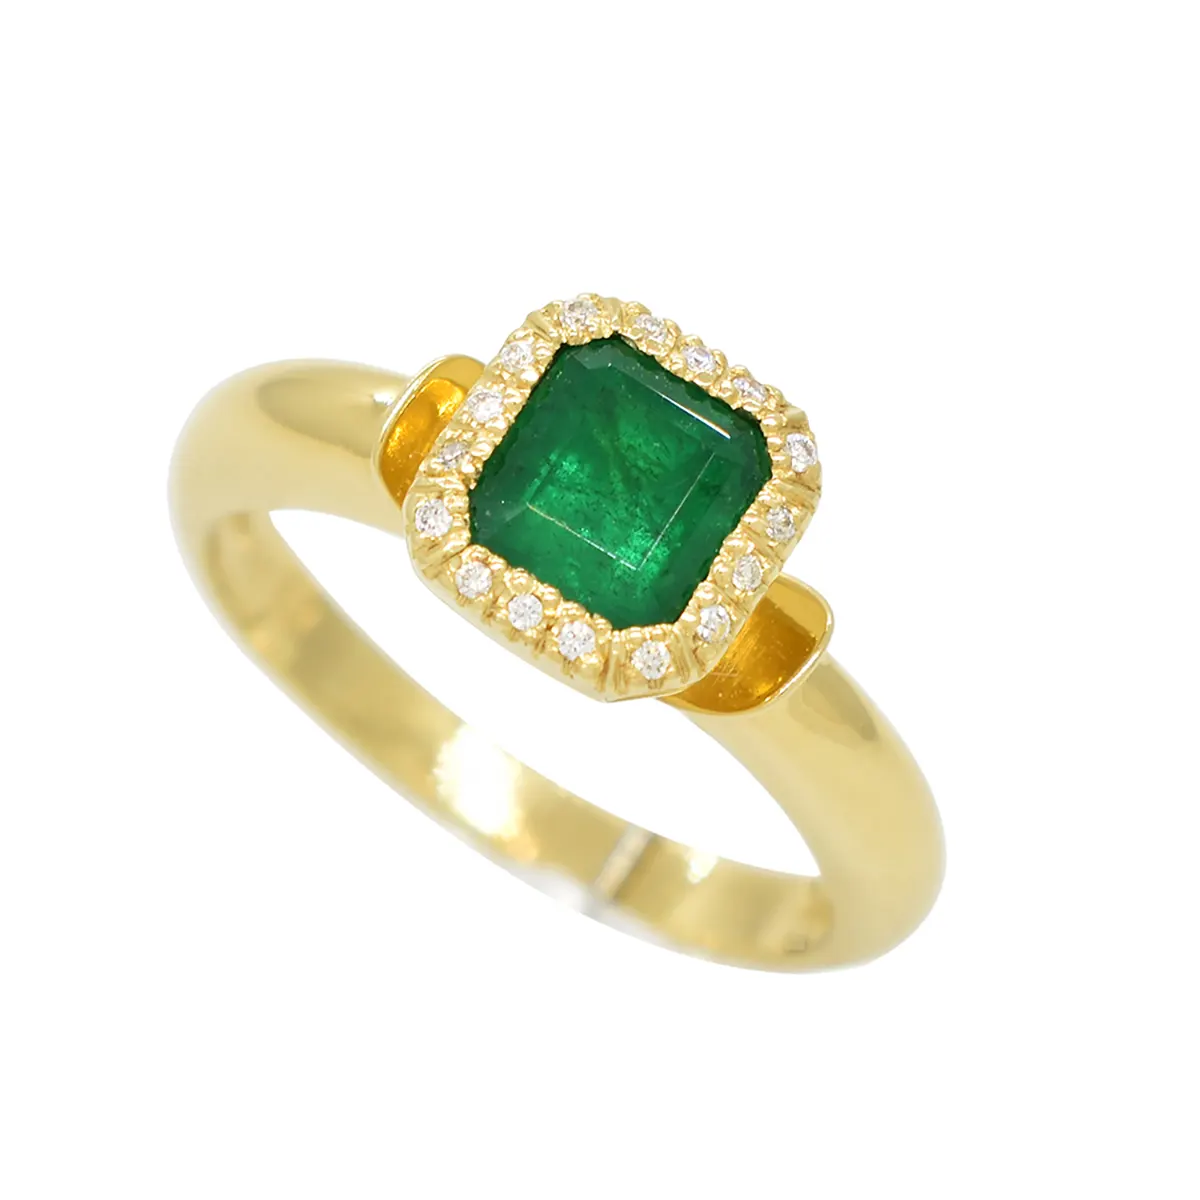 Emerald Cut Emerald in 18K Yellow Gold Ring With Diamond Halo in Bezel Setting